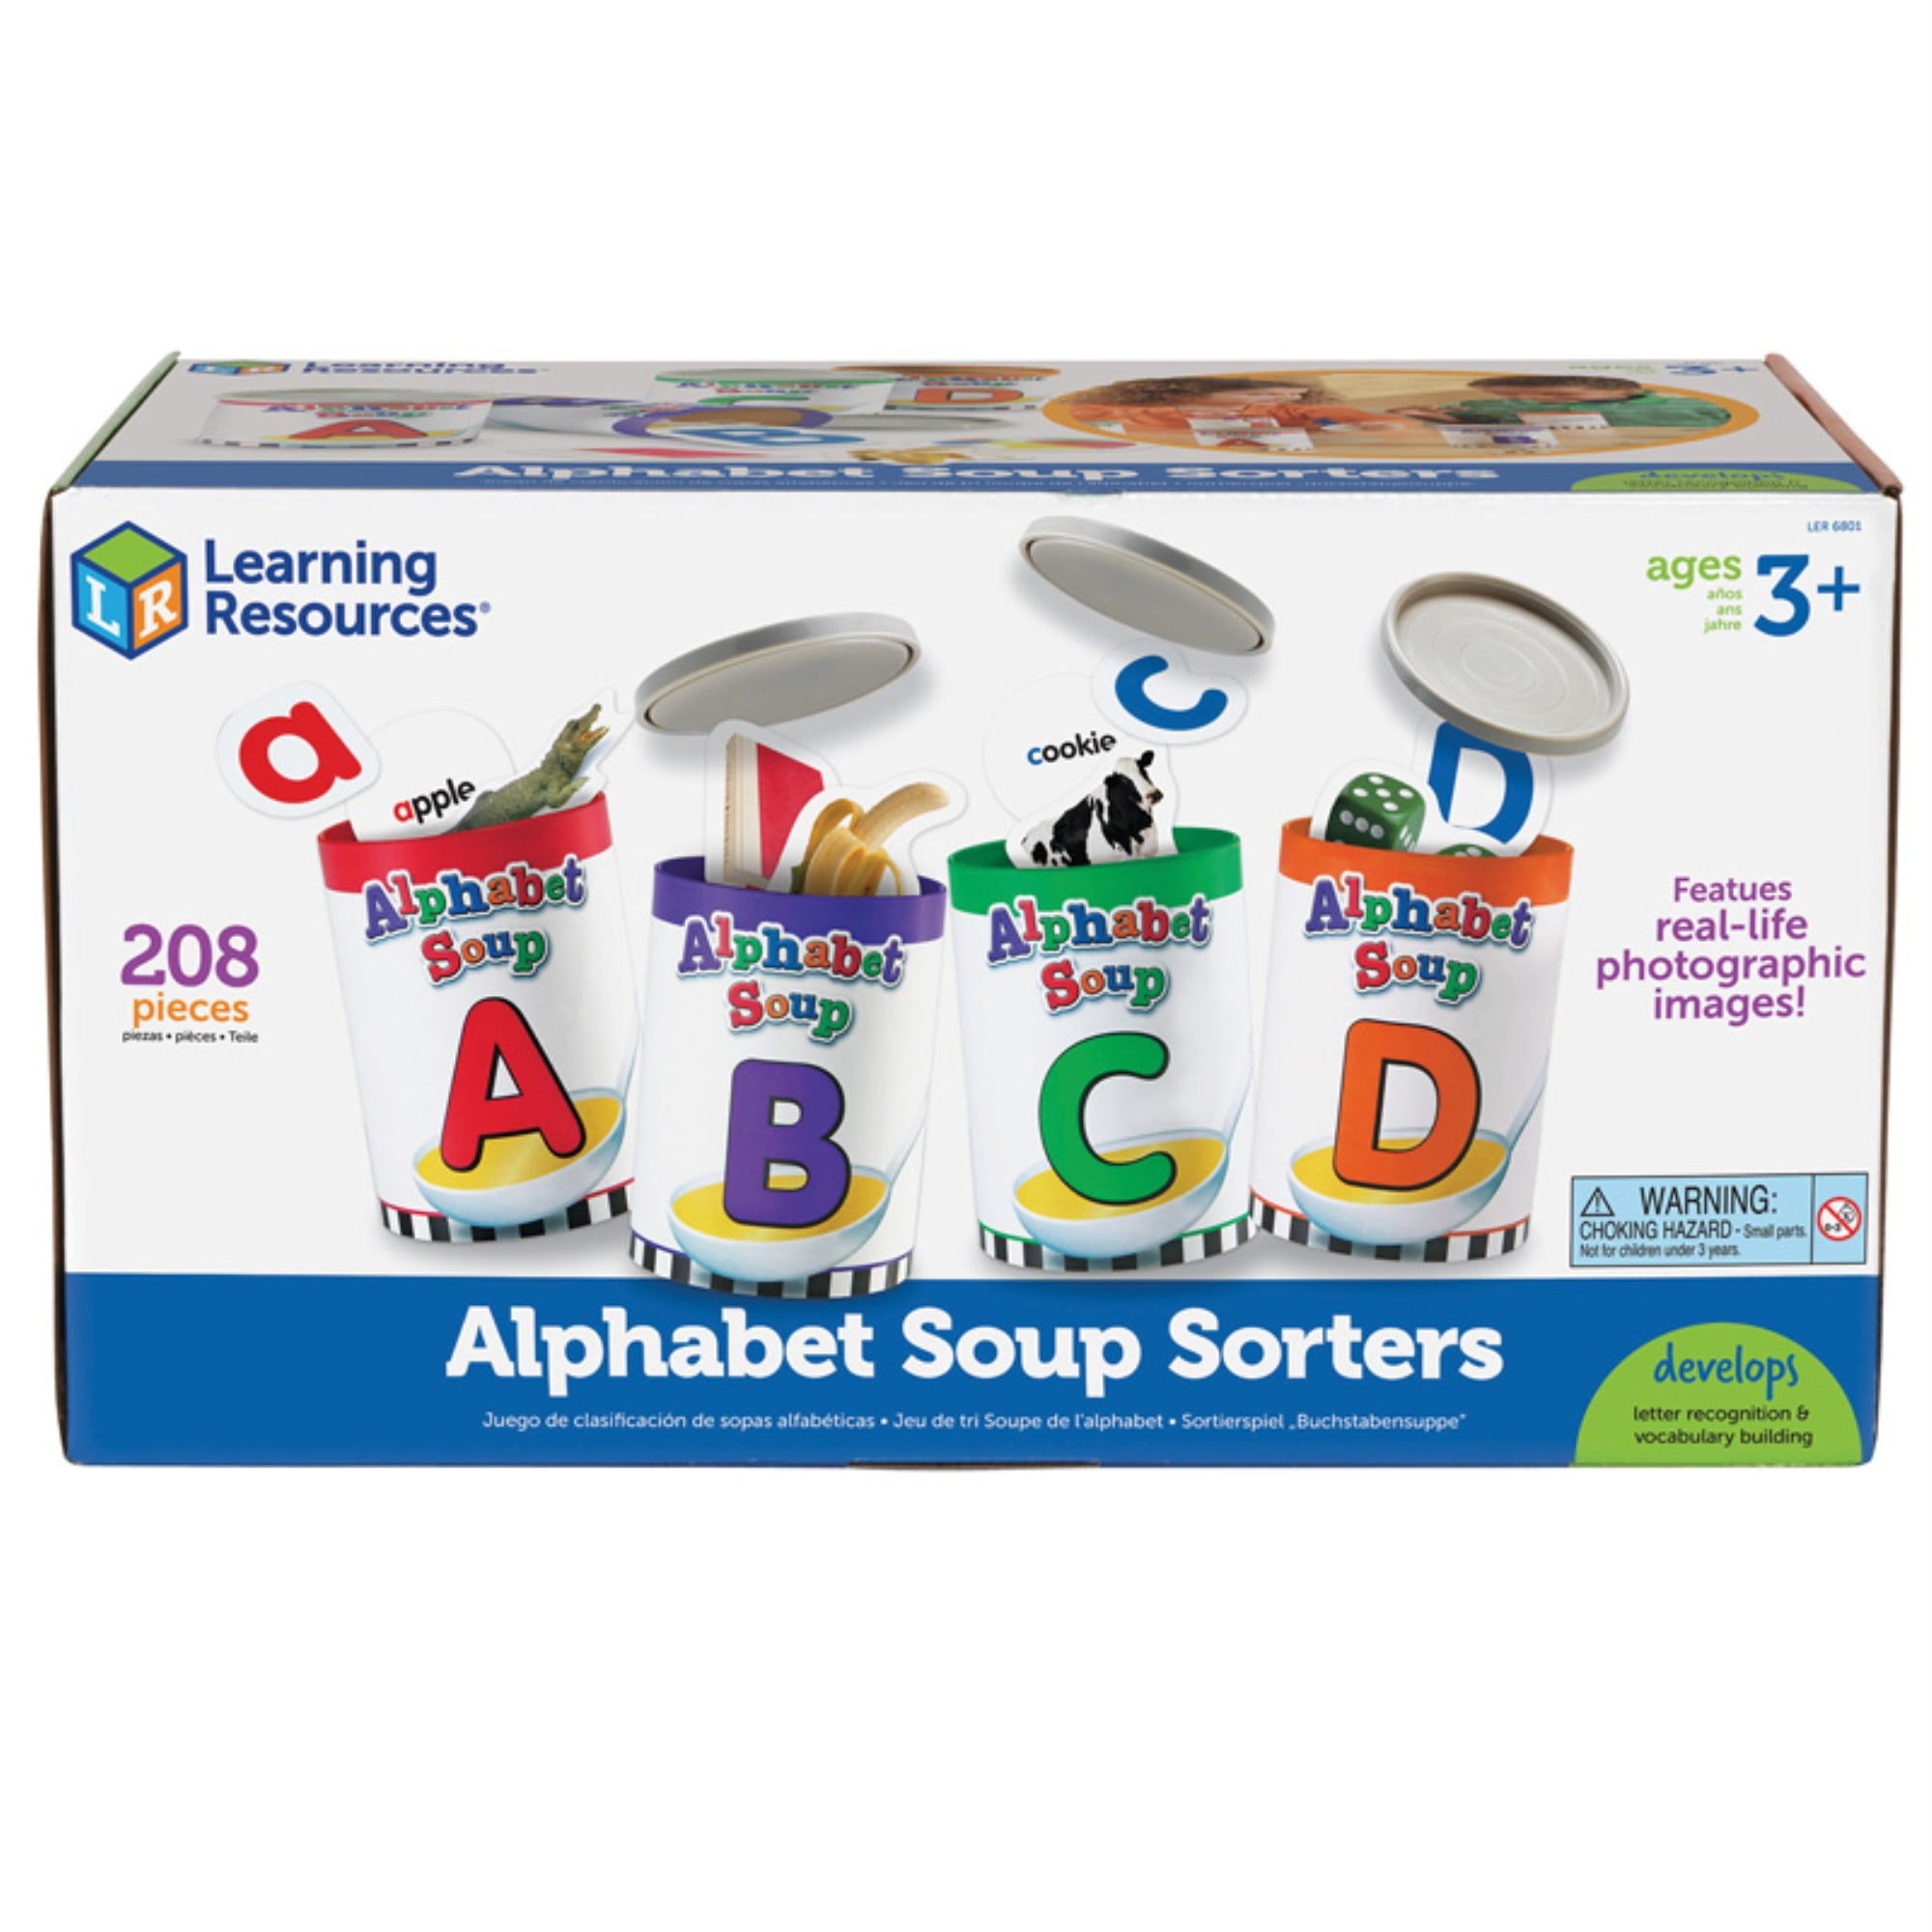 NEW Learning Resources Alphabet Soup Sorters 209 Pieces FREE SHIPPING 